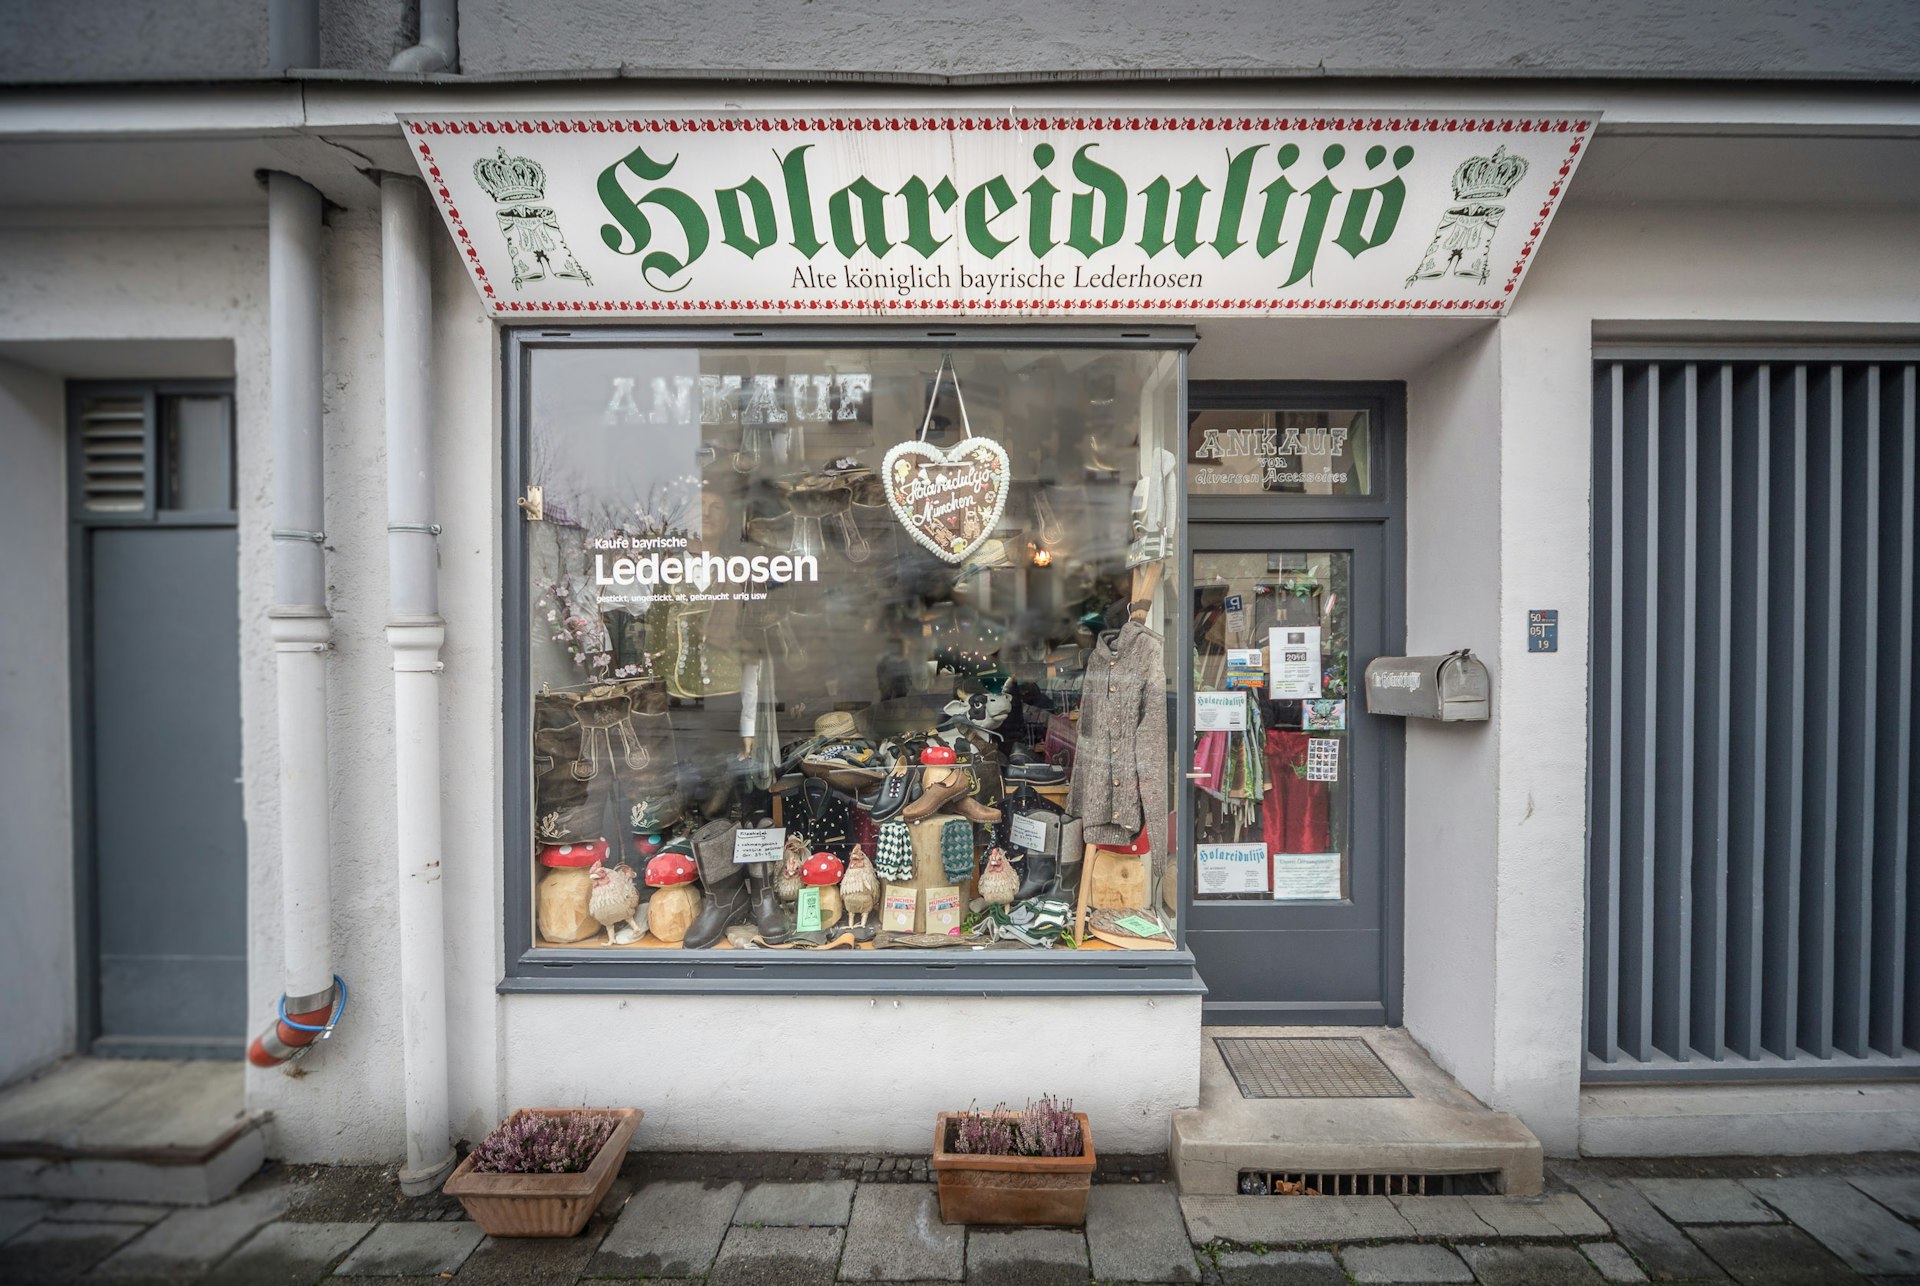 A traditional shopfront in Munich, Germany